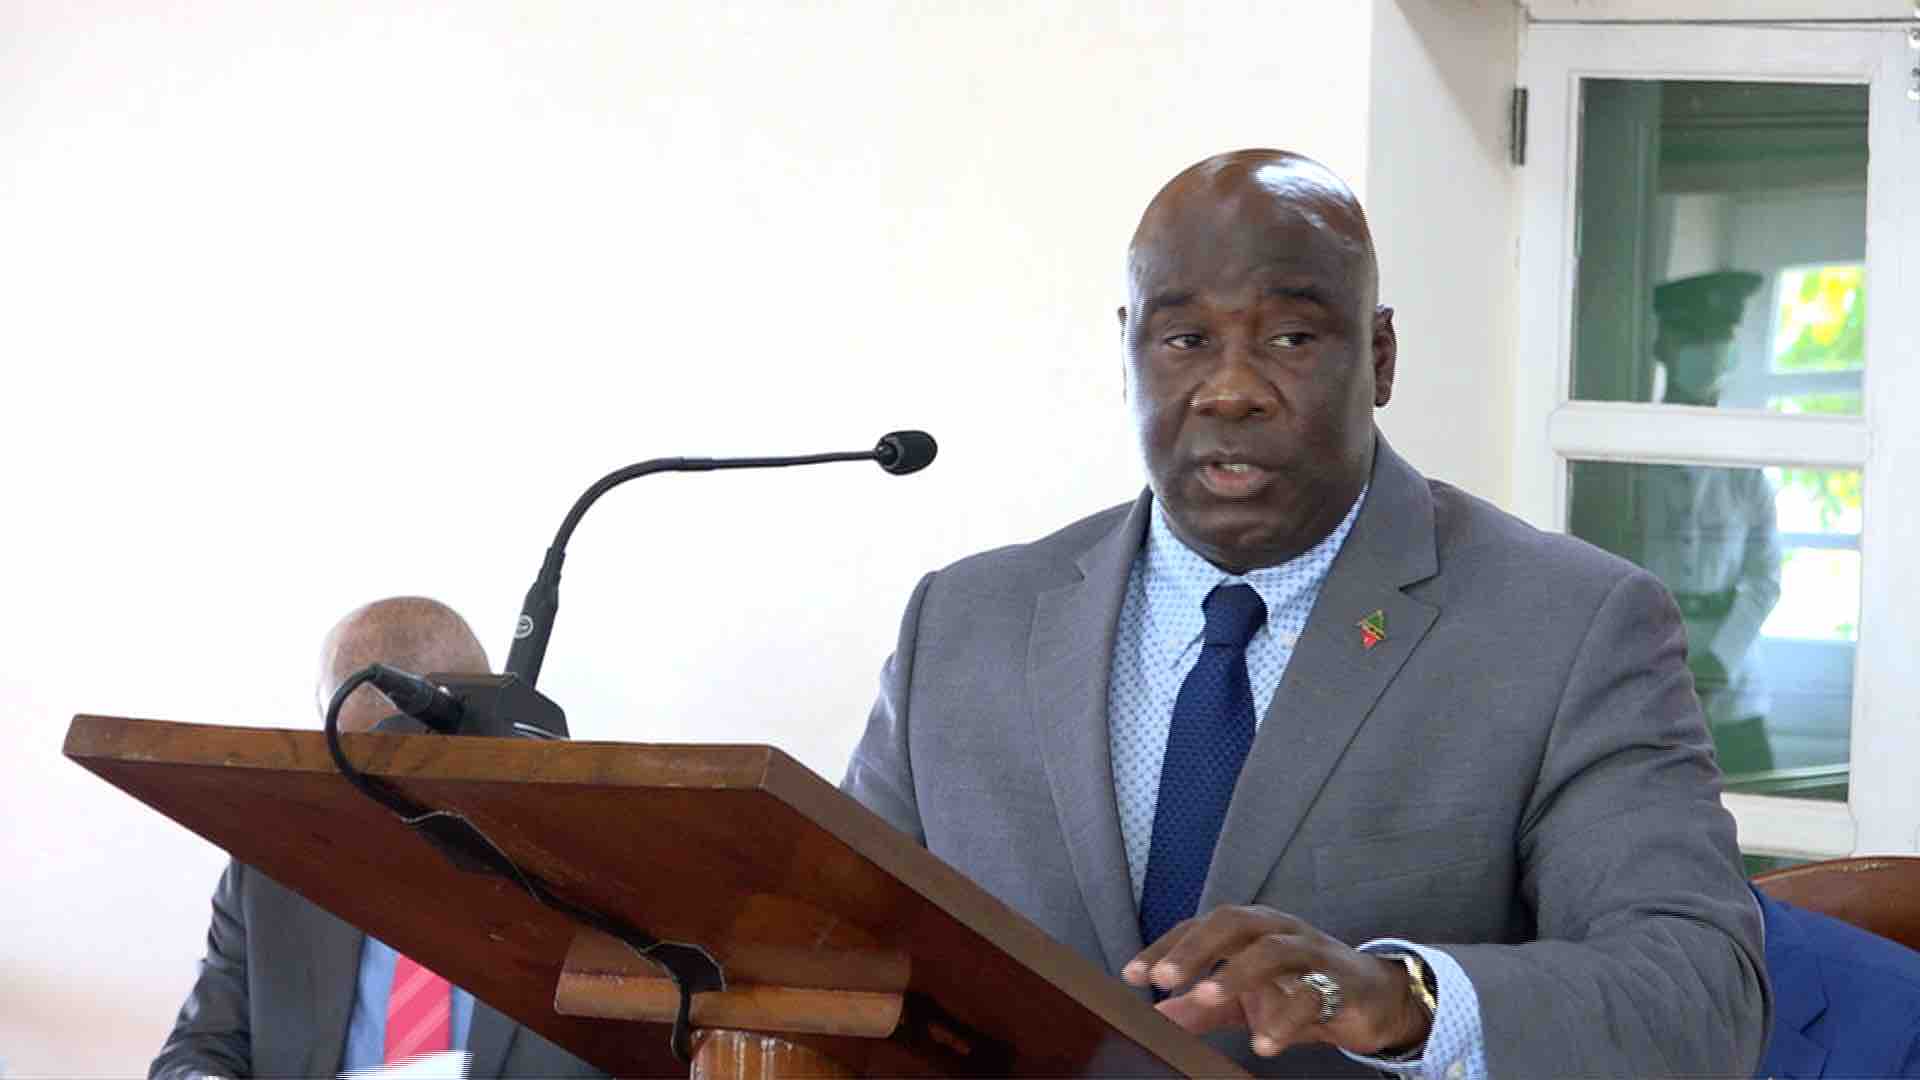 Hon. Alexis Jeffers, Deputy Premier of Nevis and Minister of Agriculture, delivering his presentation at a sitting of the Nevis Island Assembly in Chambers at Hamilton House on July 02, 2020